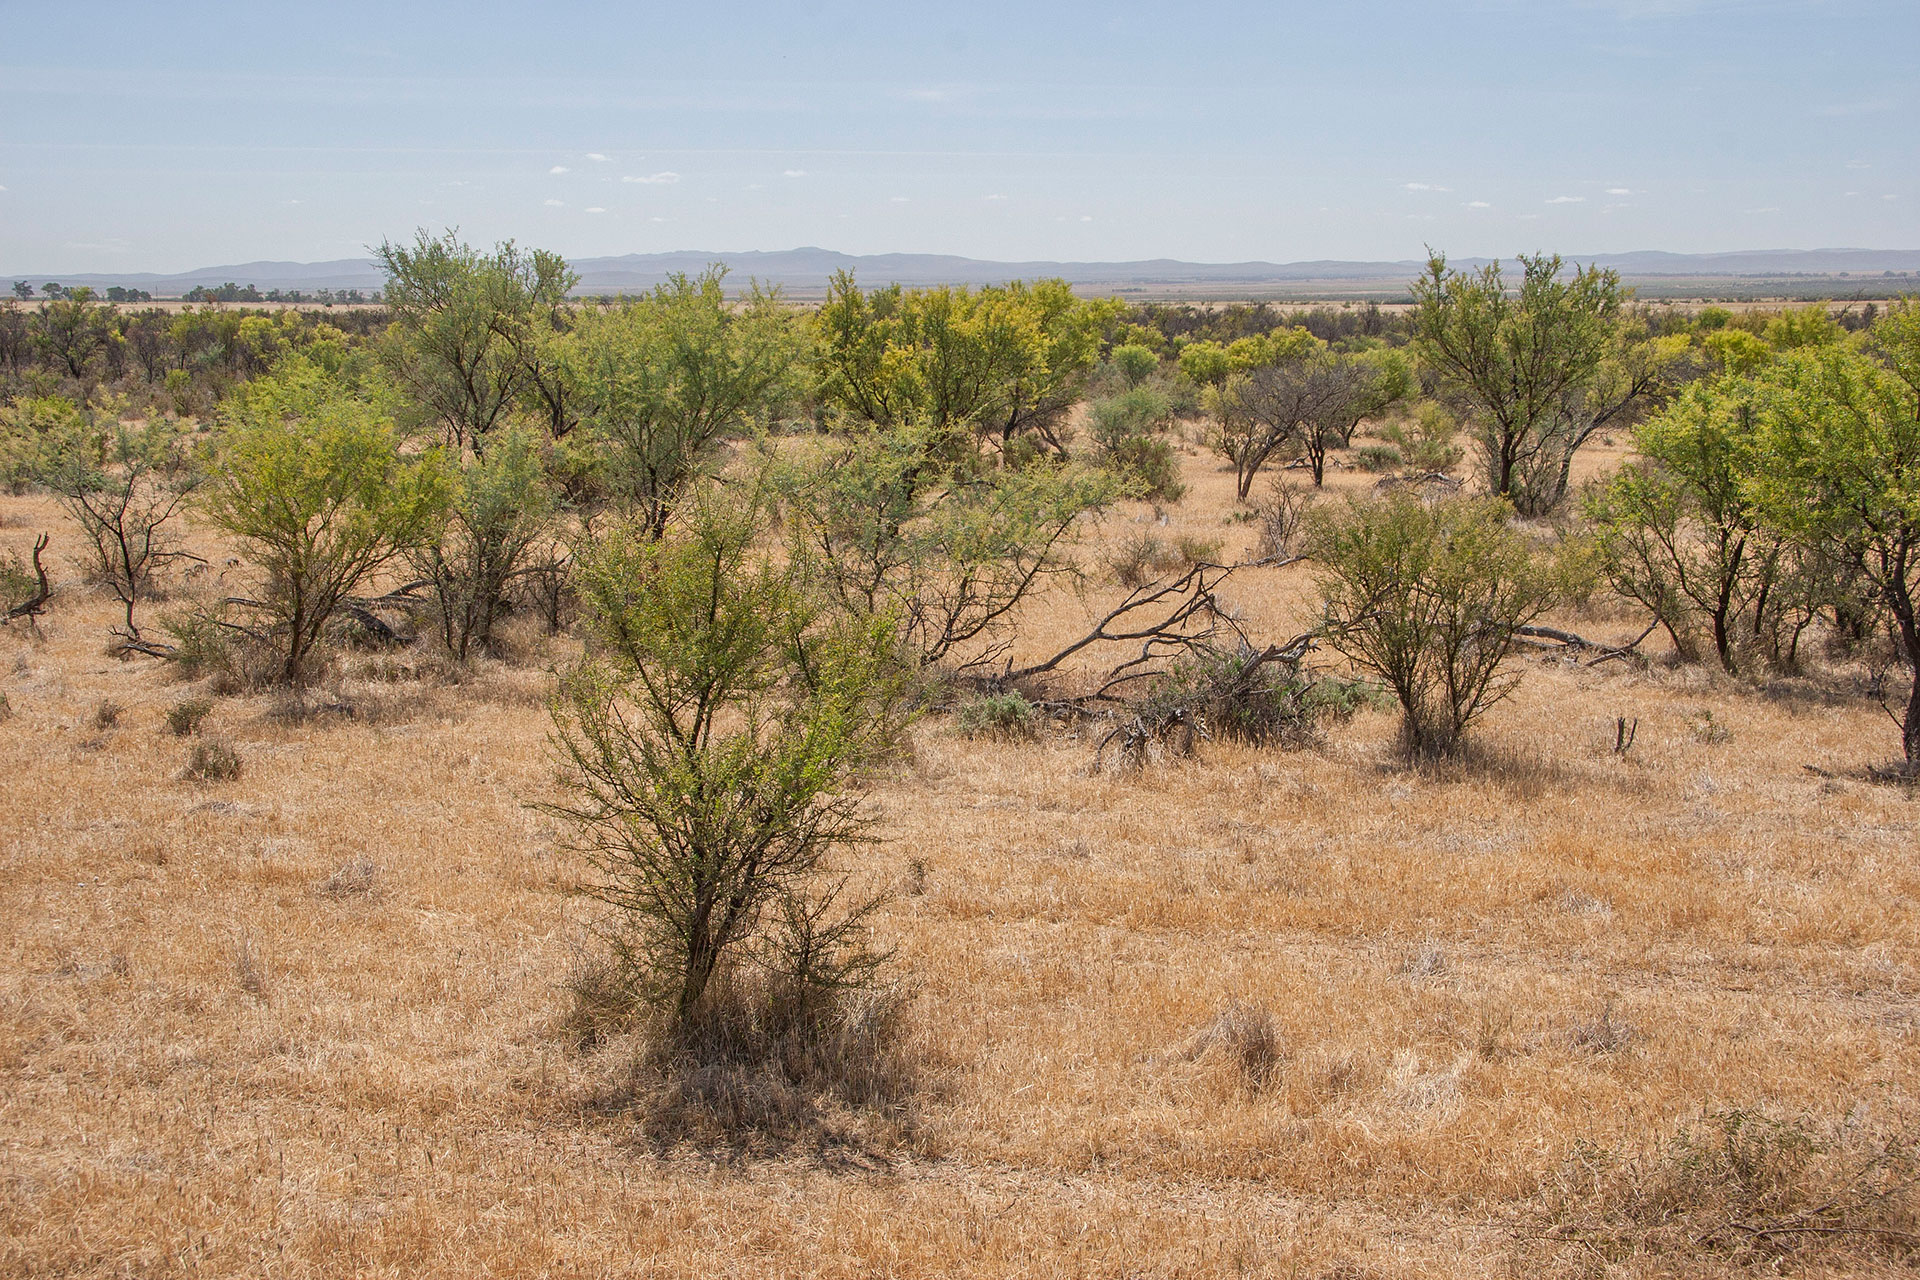 Crops fields turn to shrubland.